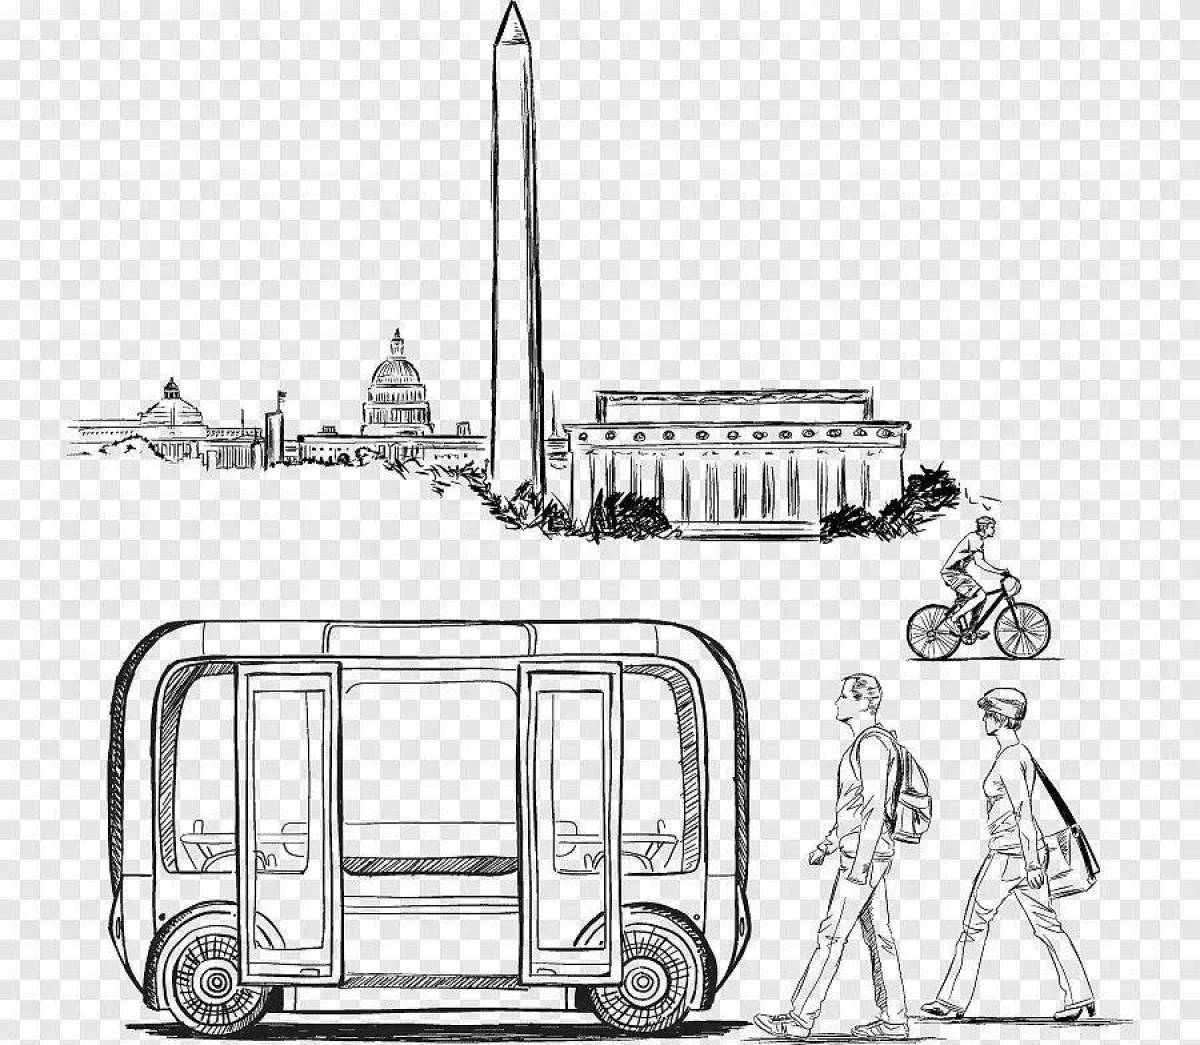 Exquisite electric bus coloring page